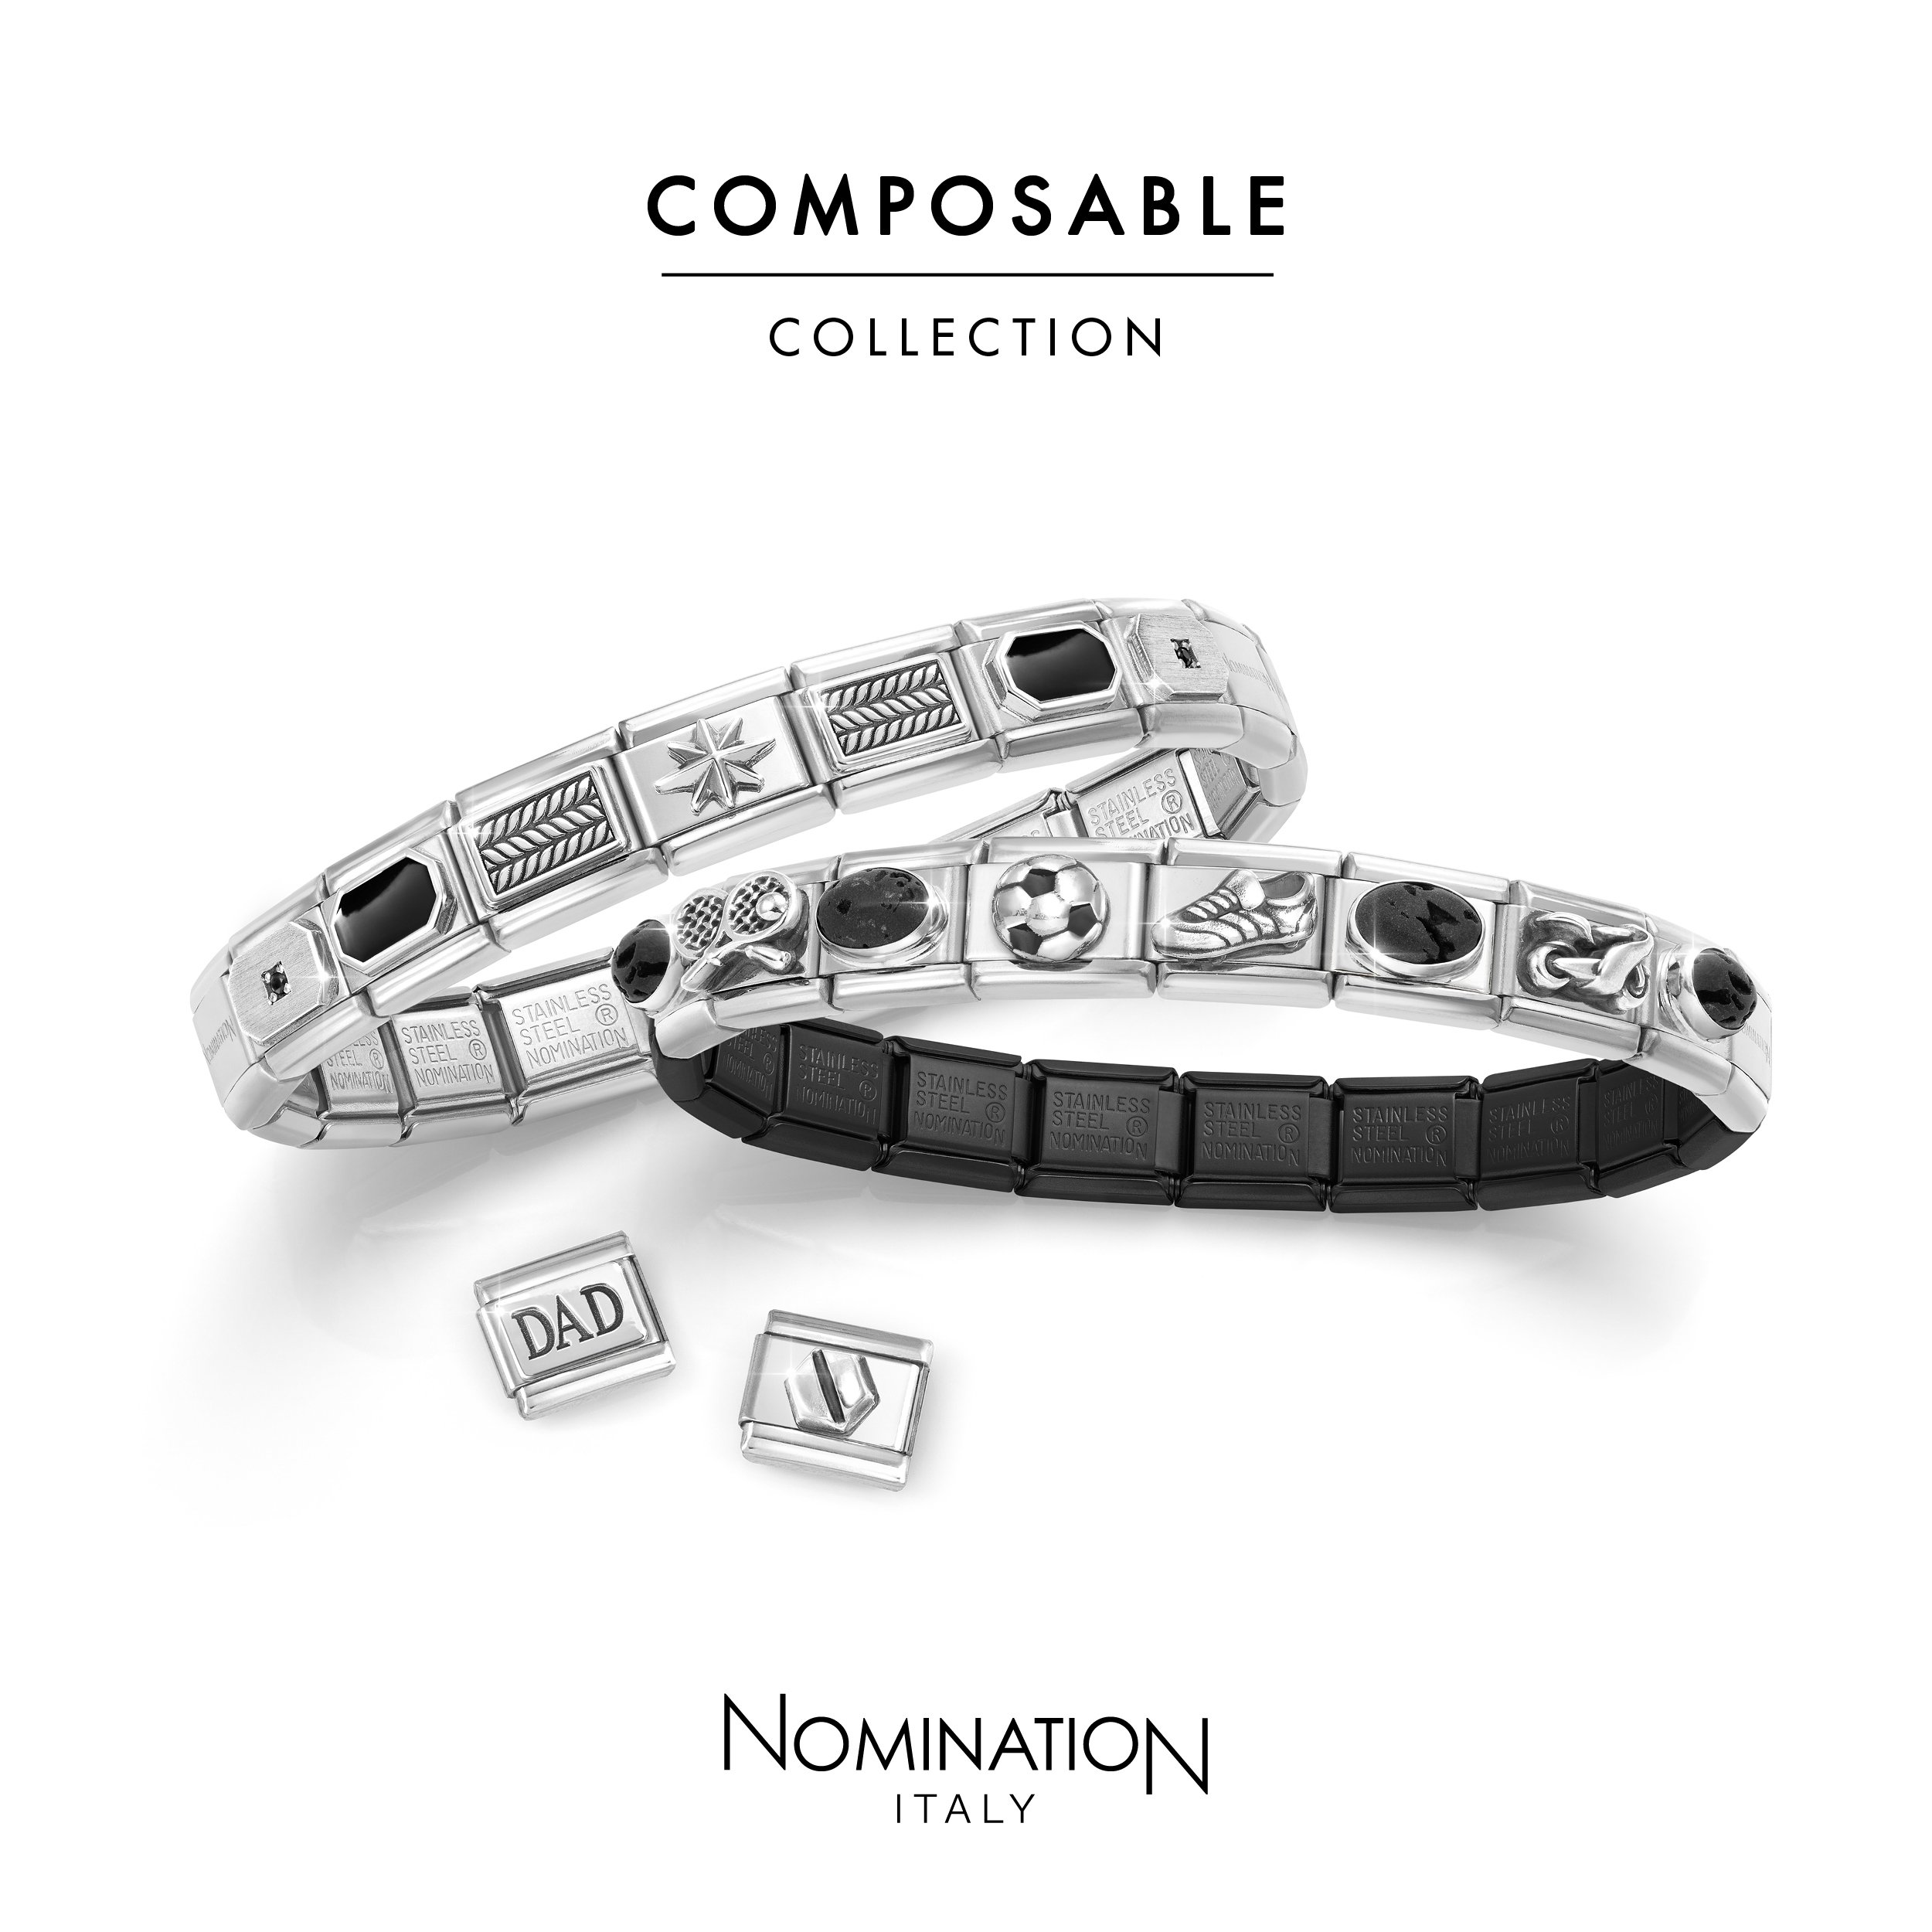 Nomination Italy Composable Classic Stainless Steel 17 Link Starter Bracelet